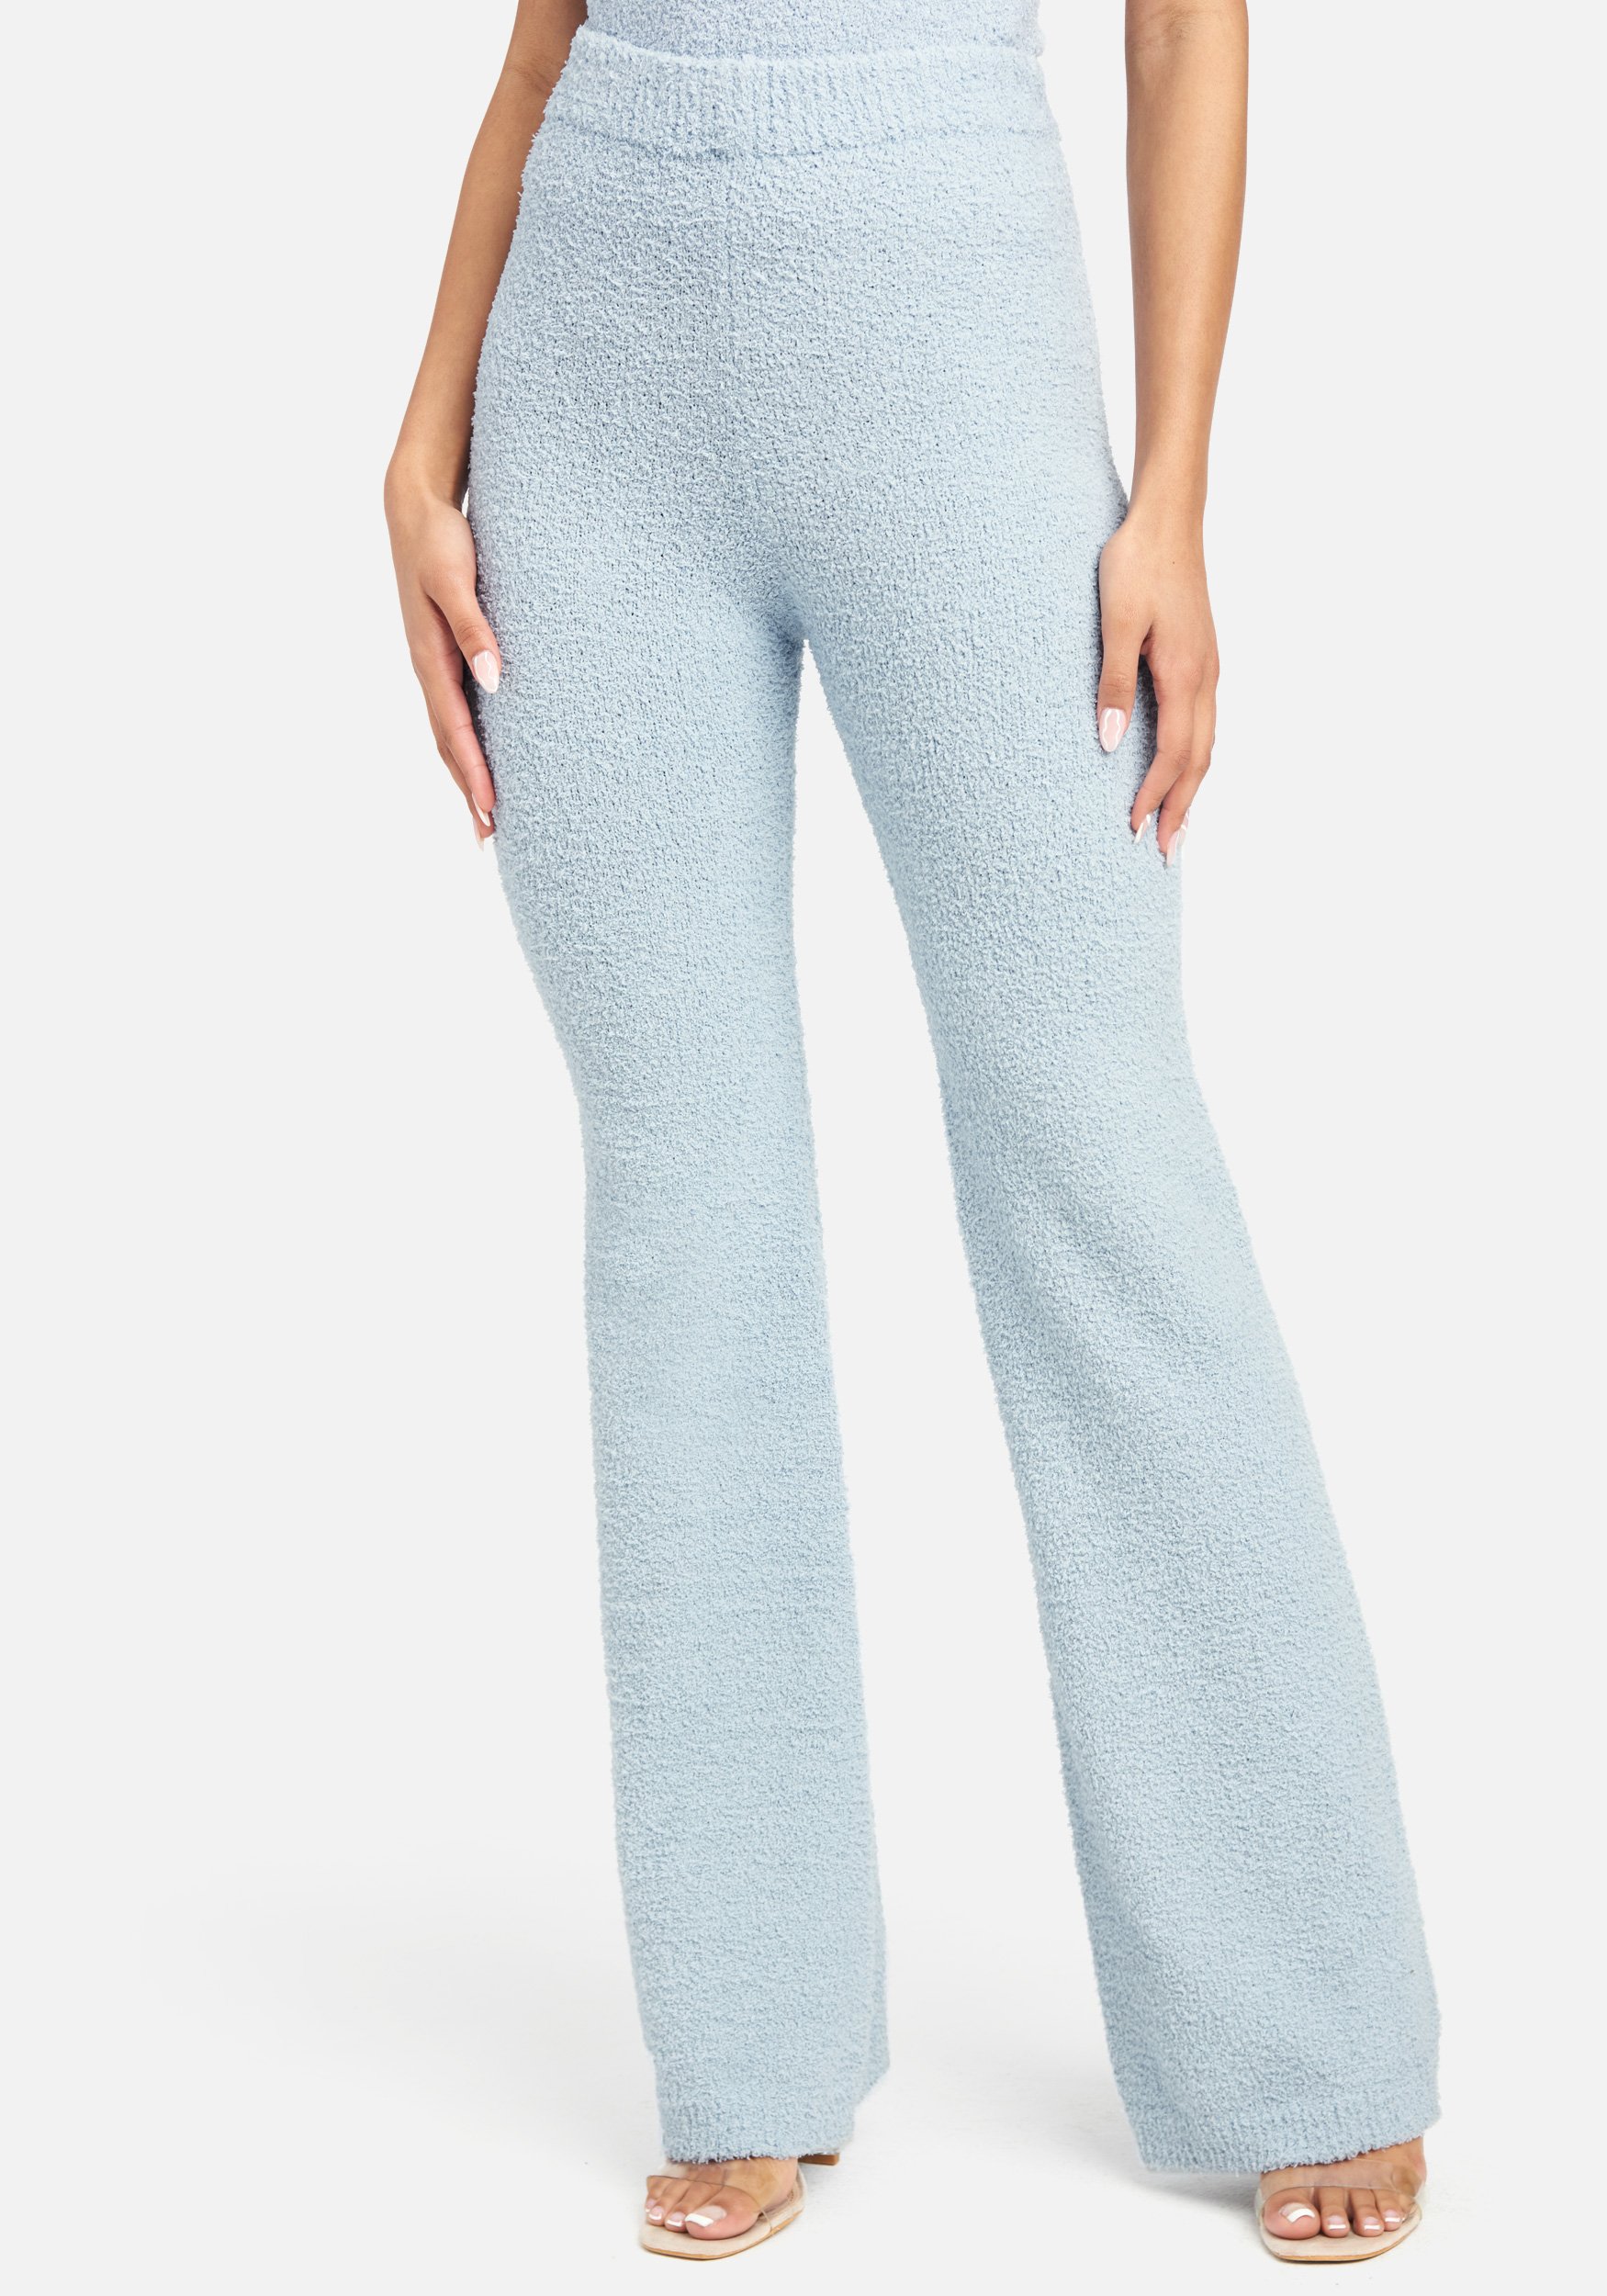 Bebe Women's Chenille Knit Pant, Size XL in Ice Blue Polyester